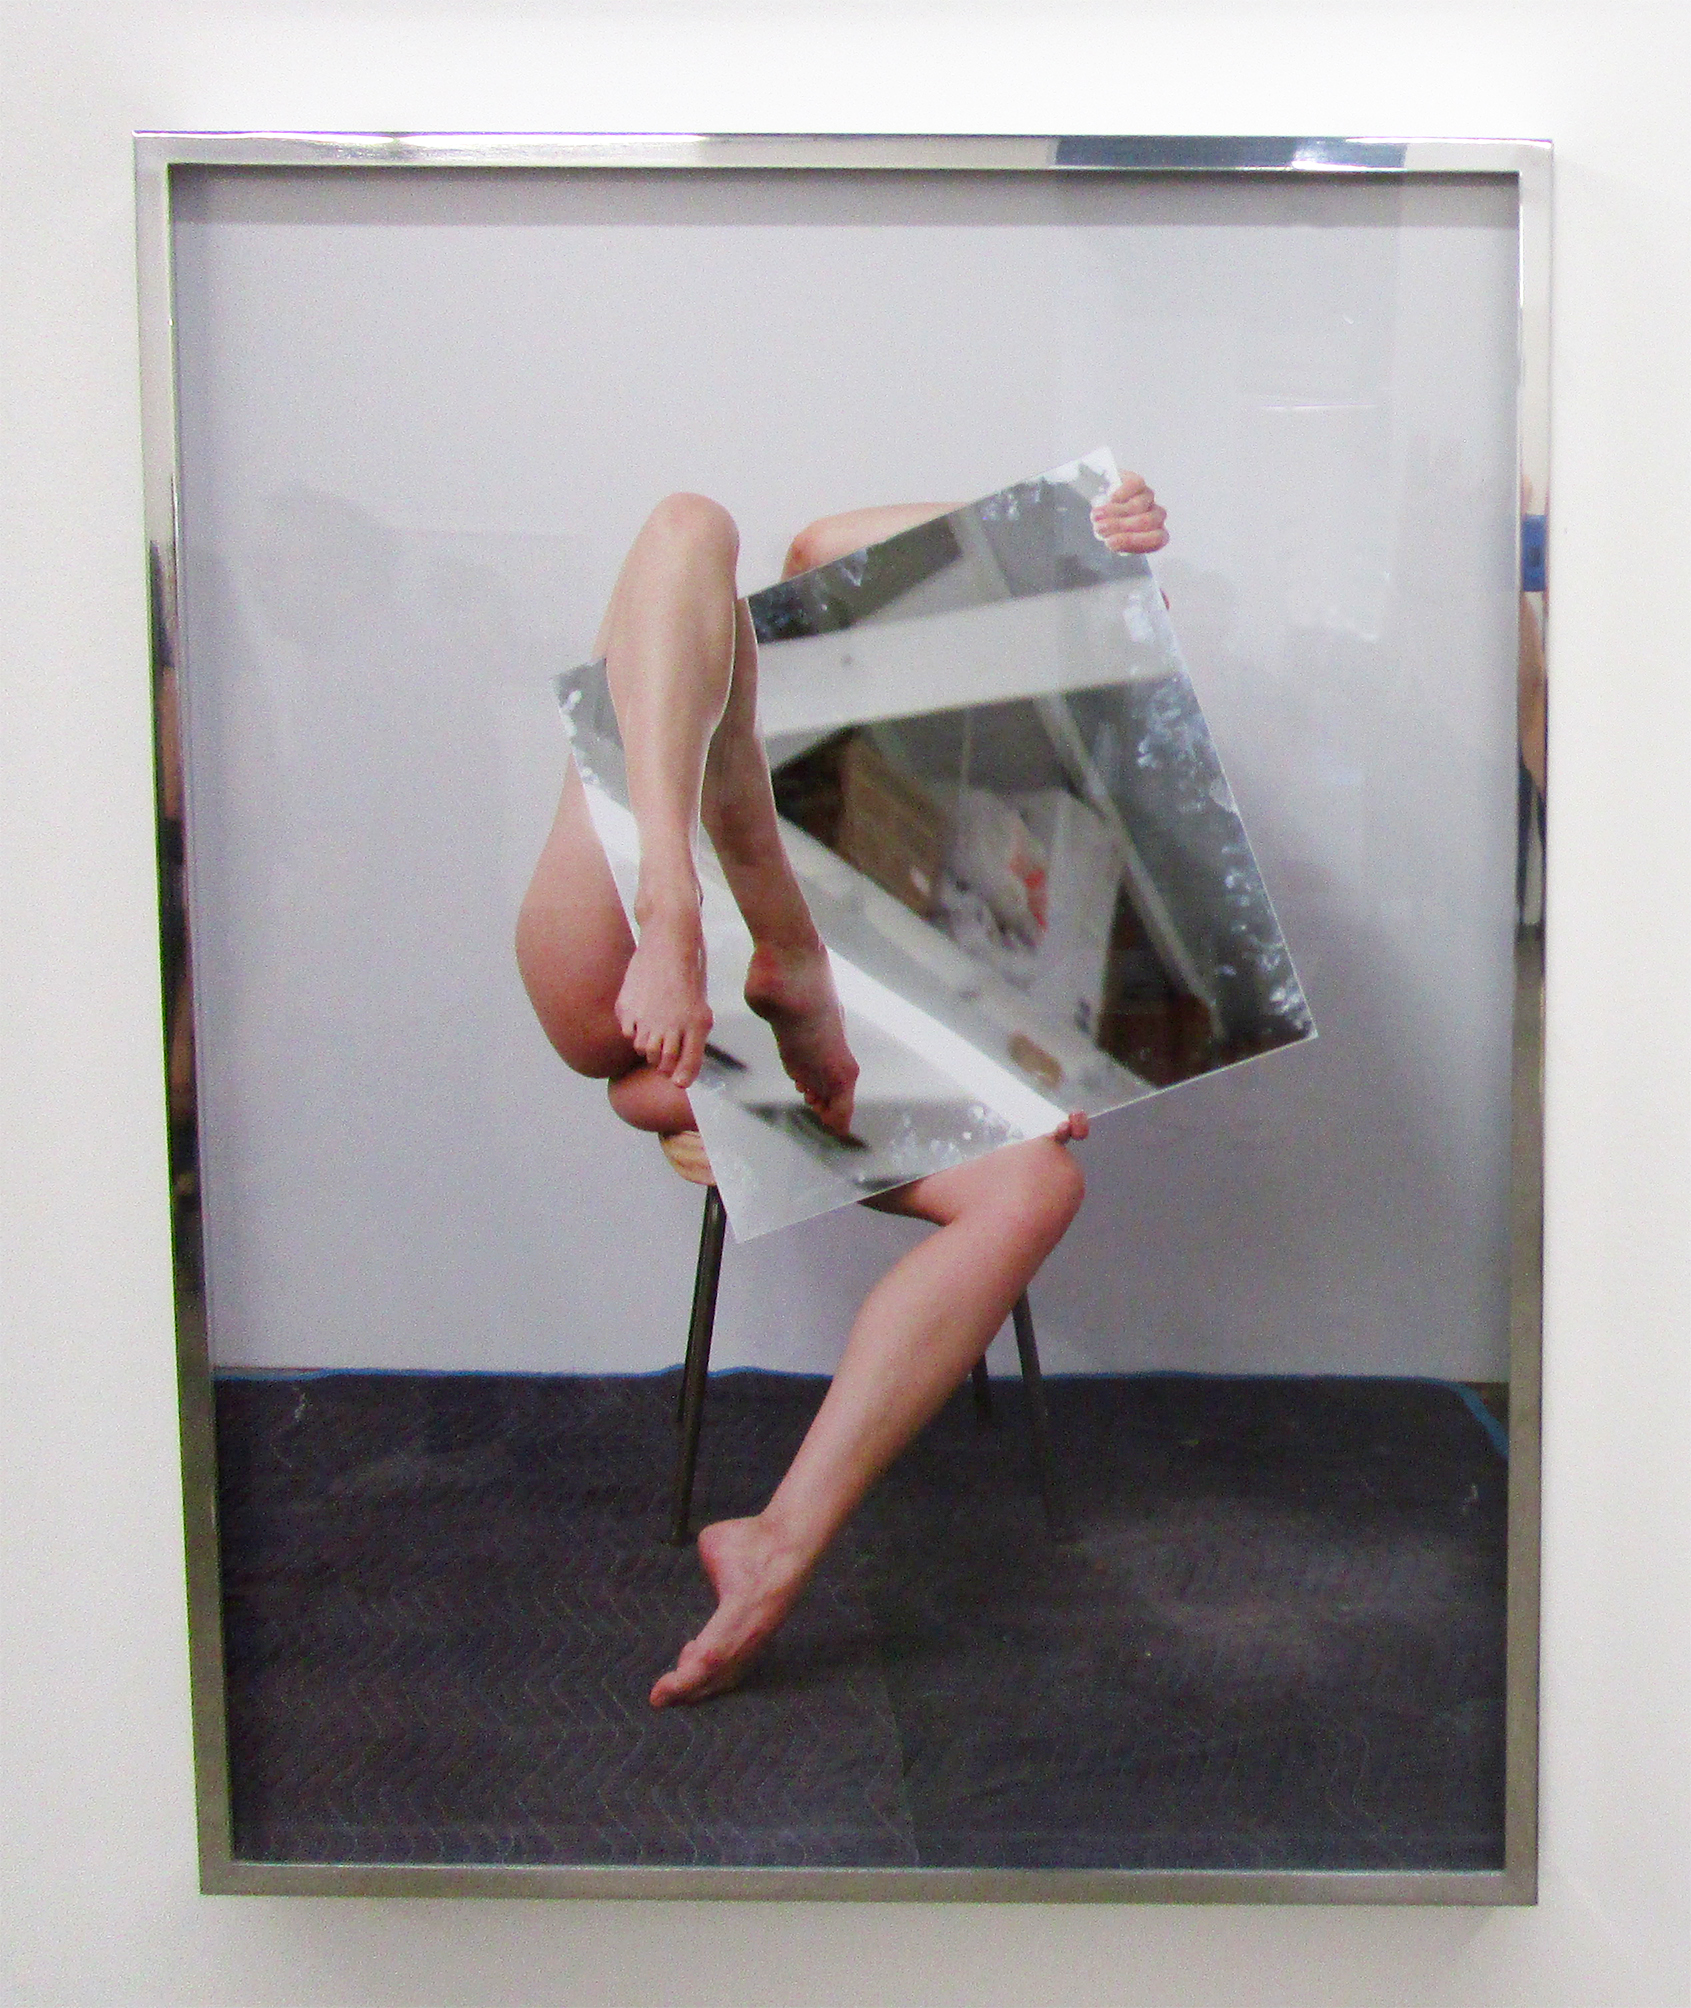 heather-rasmussen-untitled-study-in-the-studio-with-mirror-and-slippers.jpg